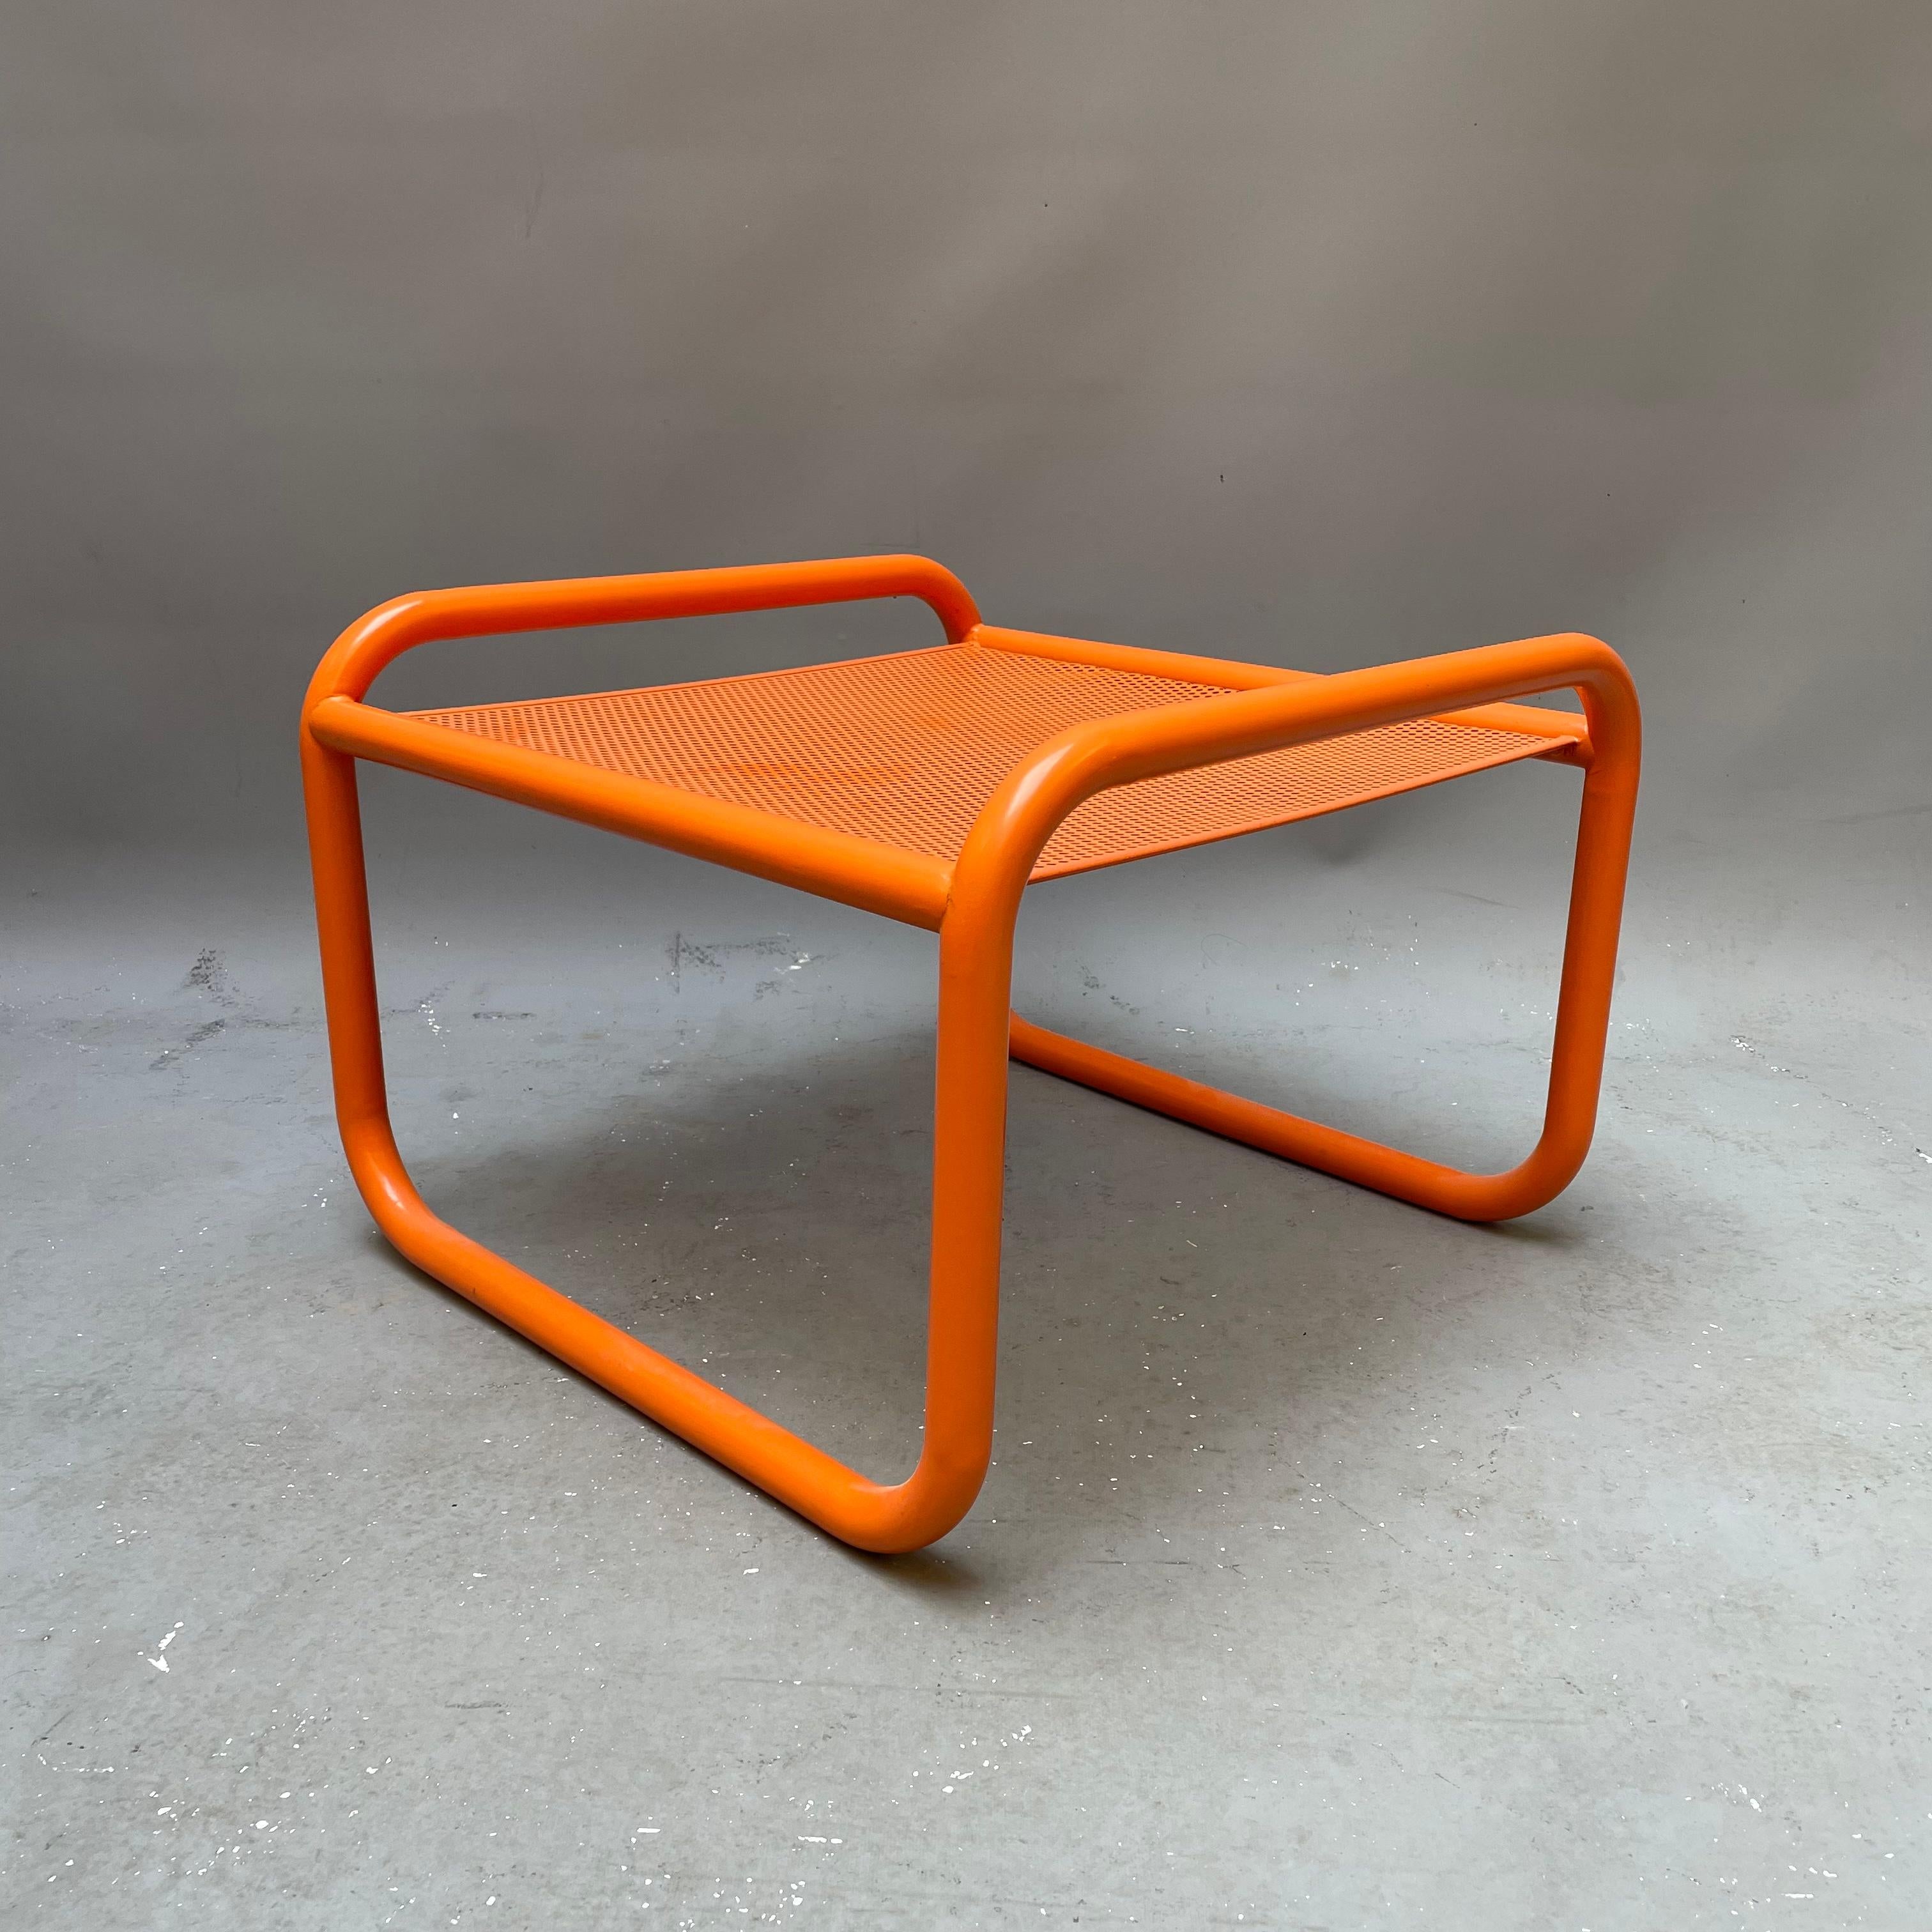 Made of steel and fabrics with original and novel patterns, Locus Solus is the collection designed by the unpredictable flair of Gae Aulenti in 1964. The frame of Locus Solus Chair is made of painted stainless steel tubing. The light and colorful